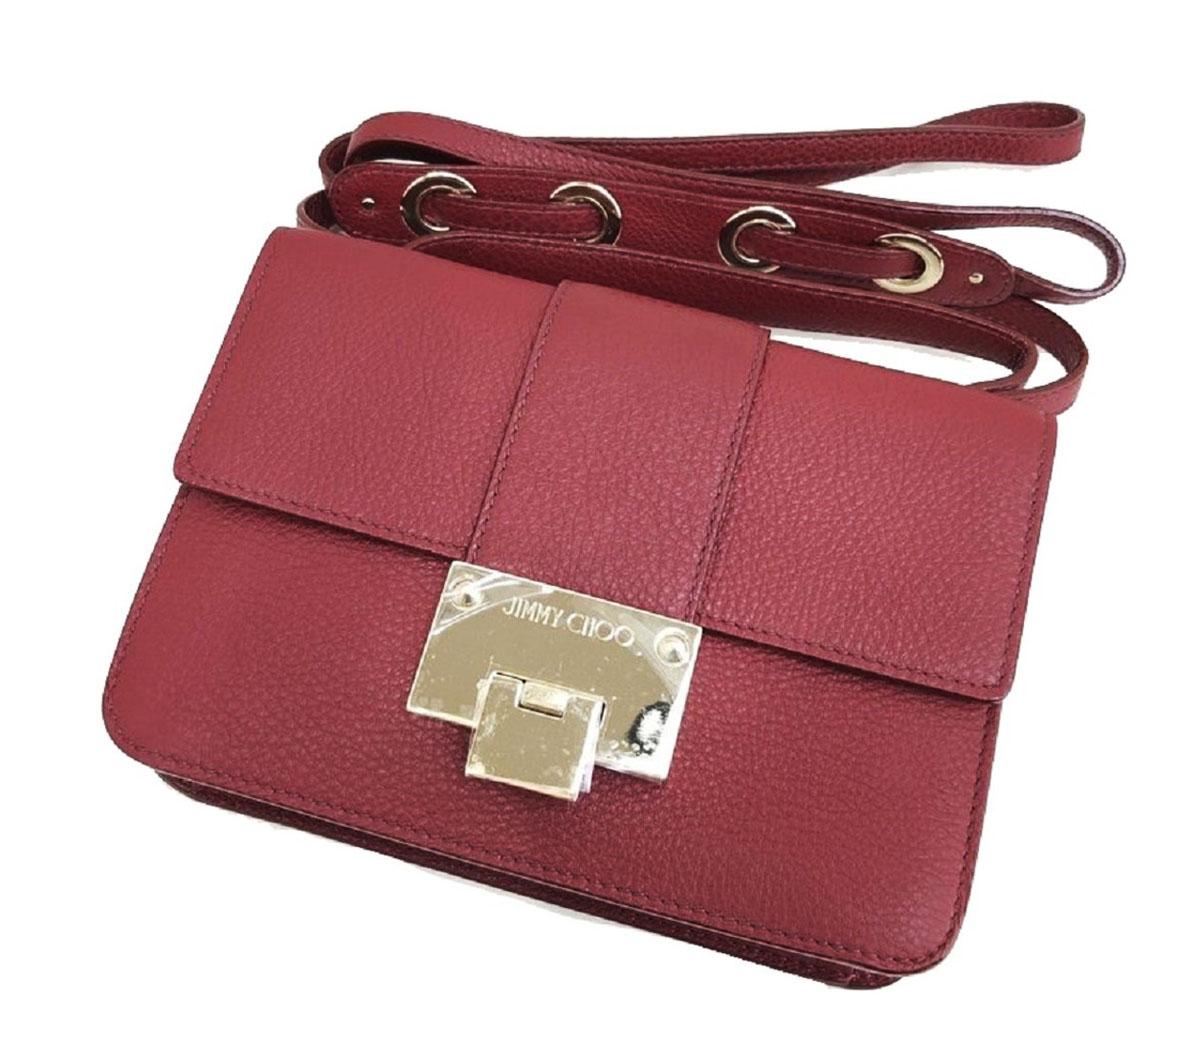 New JIMMY CHOO *Rebel* Red Grainy Calf Leather Cross Body Bag In New Condition For Sale In Montgomery, TX